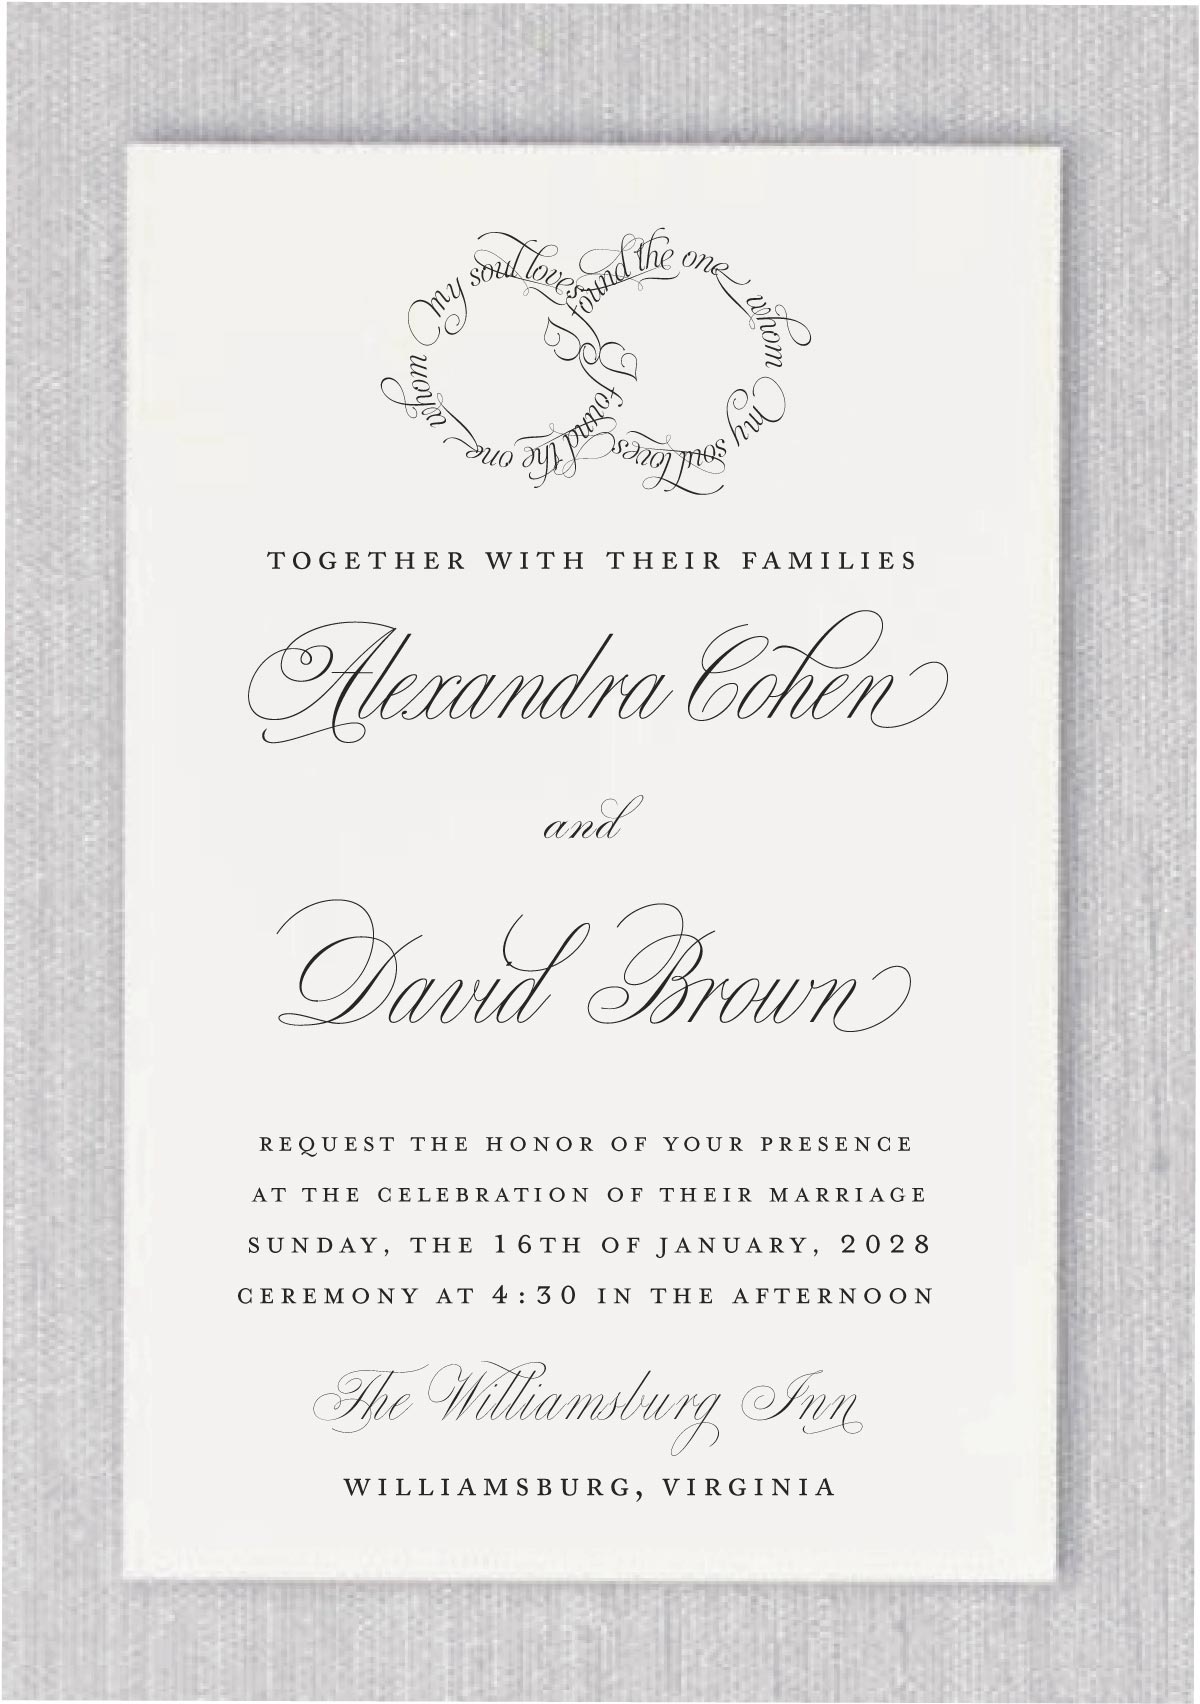 This invitation is simple but elegant! Simply to Impress Wedding Invitation is a simple but elegant style wedding invitation with the logo “I found the whom my soul delight” in a shape of wedding rings and decorates this stunning wedding invitation. Your guests will admire your style.